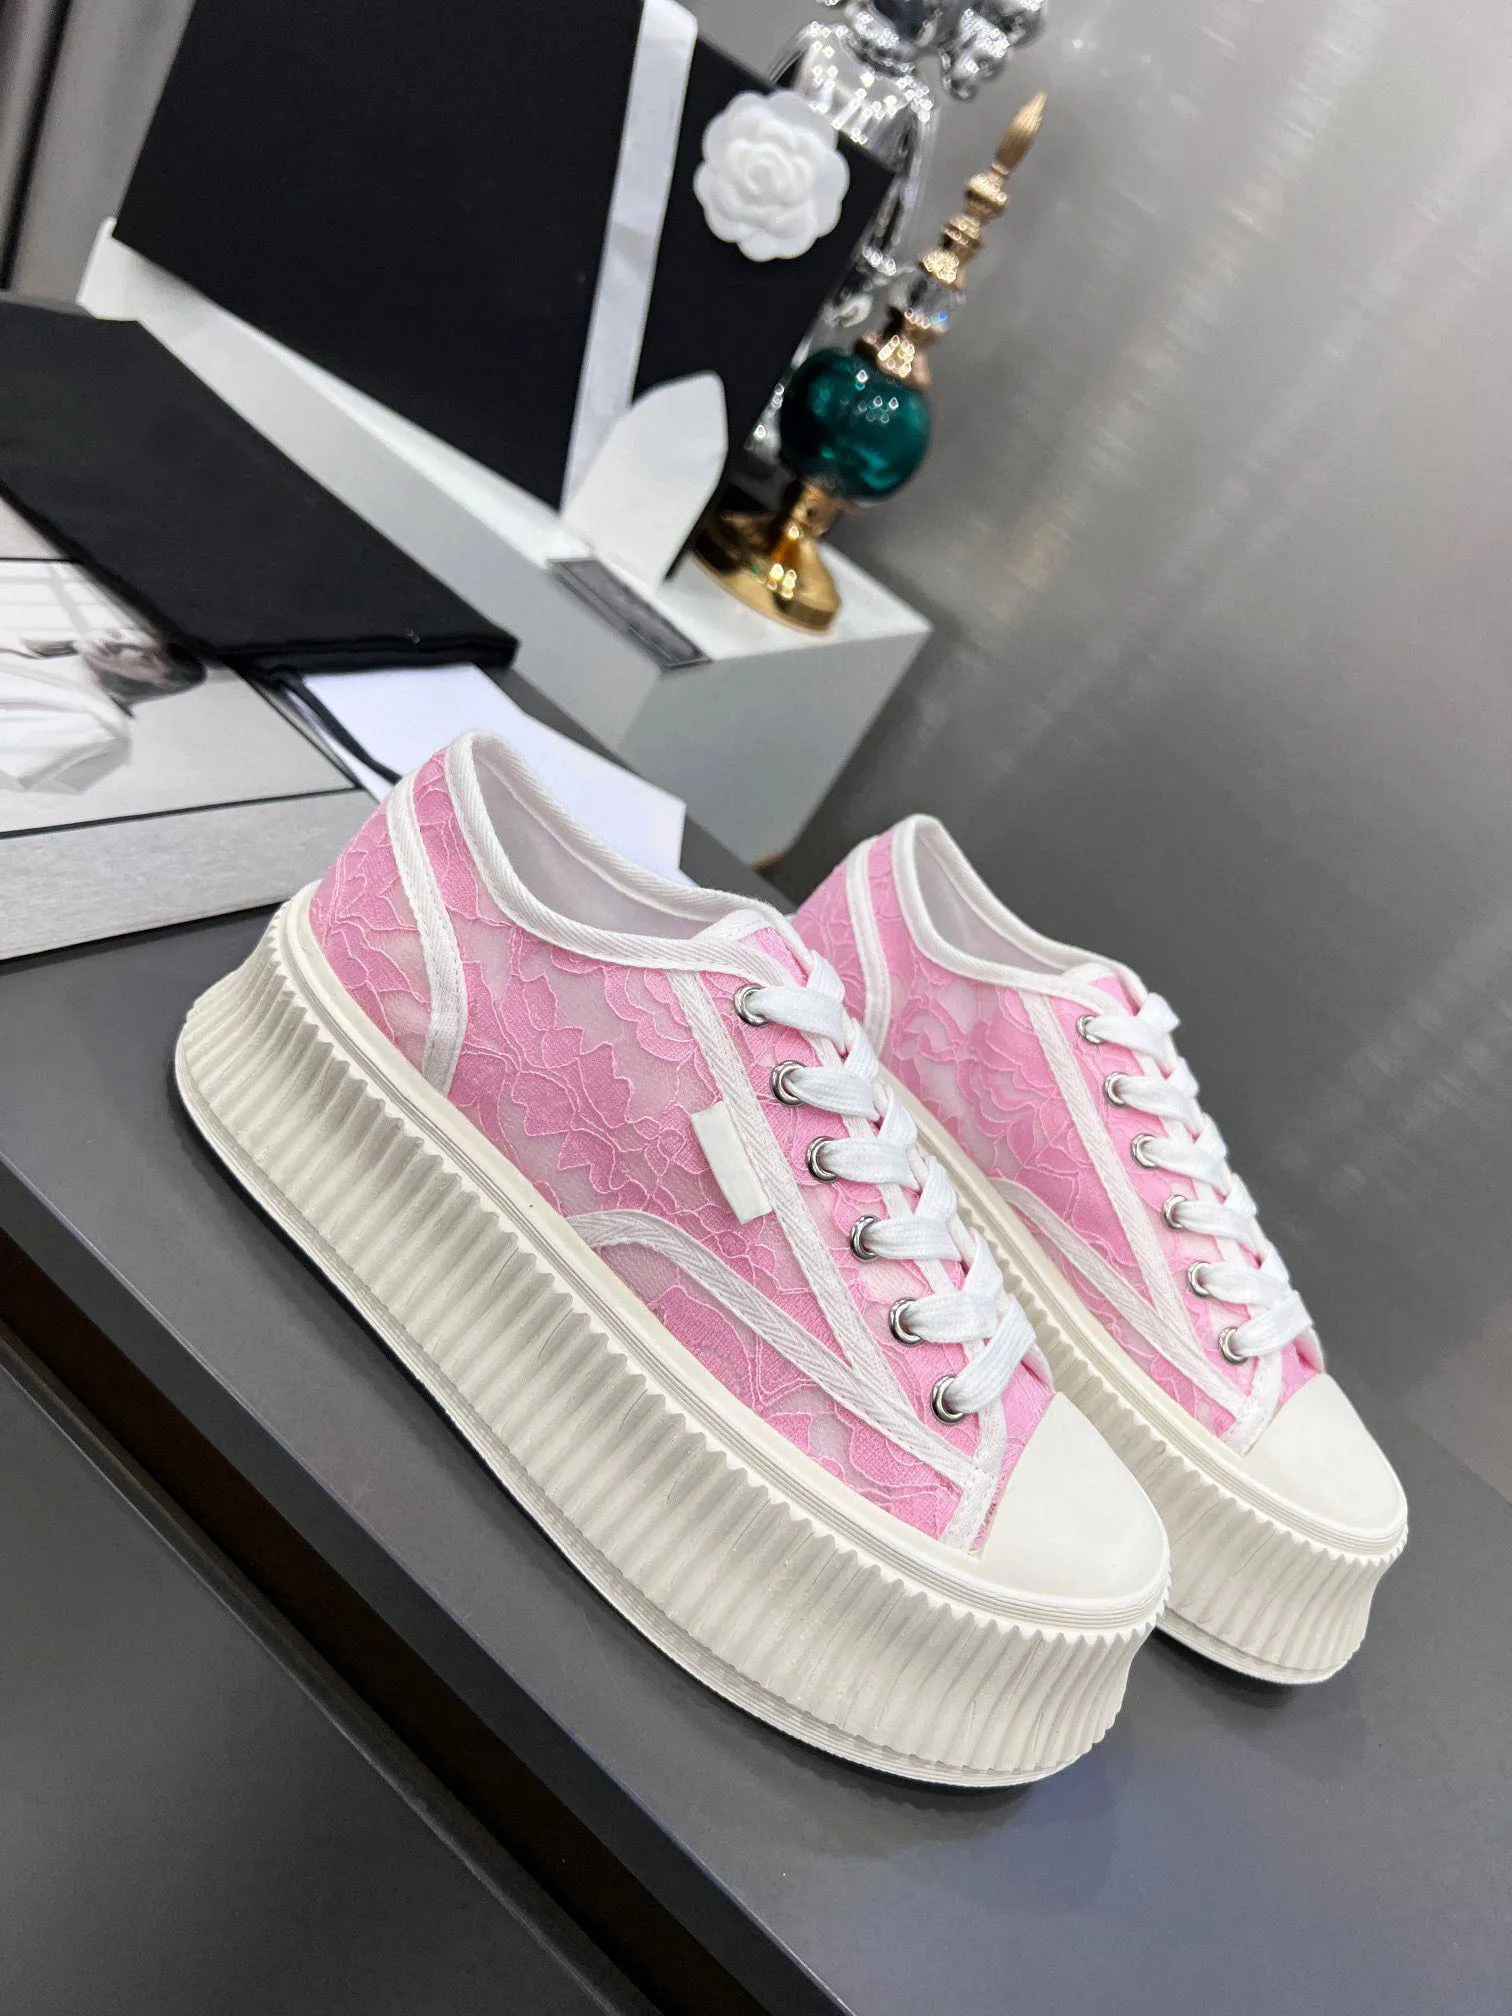 Casual Shoes Lace-Up Running Trainers Woman Shoe Sneakers White Women Travel Leather Lady Thick Soled Designer Platform Gym Sneaker 100% Cowhide Size 35-41